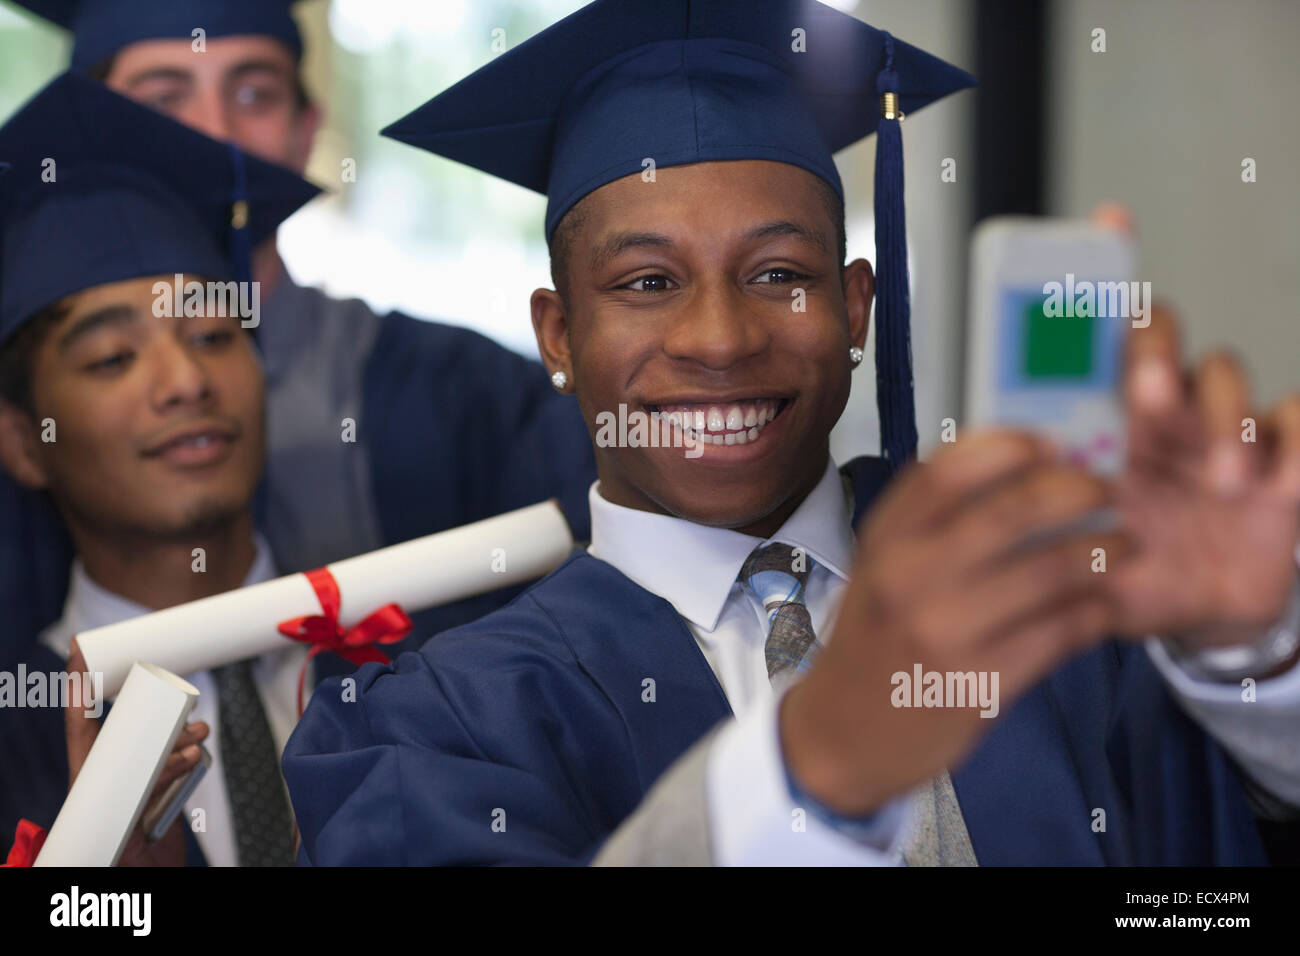 Smiling male student wearing graduation clothes taking selfie with friends Stock Photo